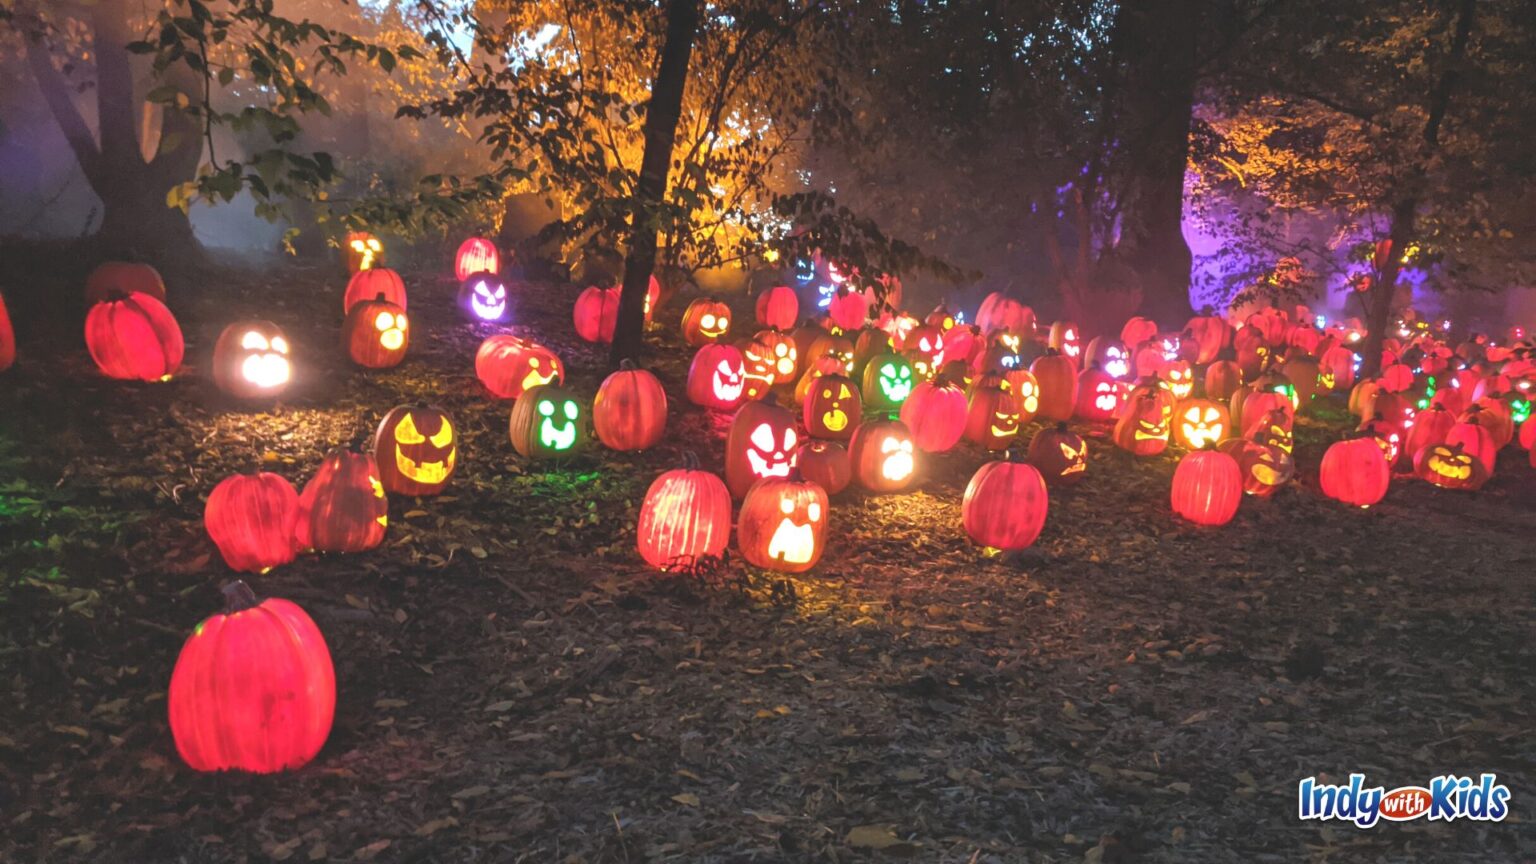 Newfields Harvest Nights Spooky Halloween Light Show for All Ages